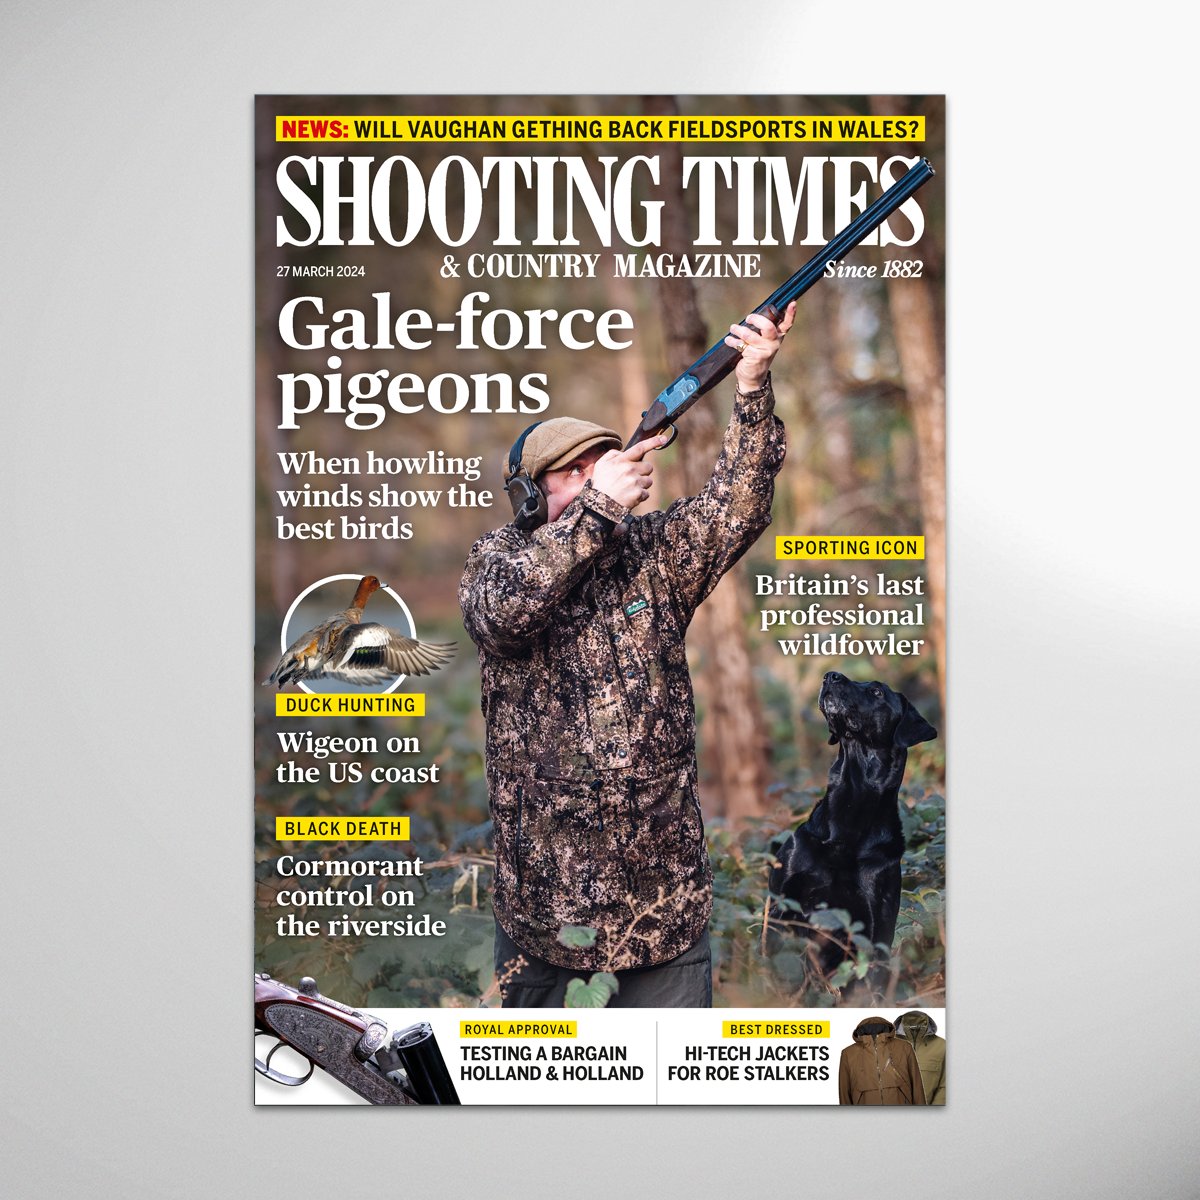 The latest issue of Shooting Times is out now! This week, Gareth Dockerty explains why BASC’s insurance is a market leader, and explores what it means for the associations members as a result. Ferreting is still an art form and you must have the right equipment, says John